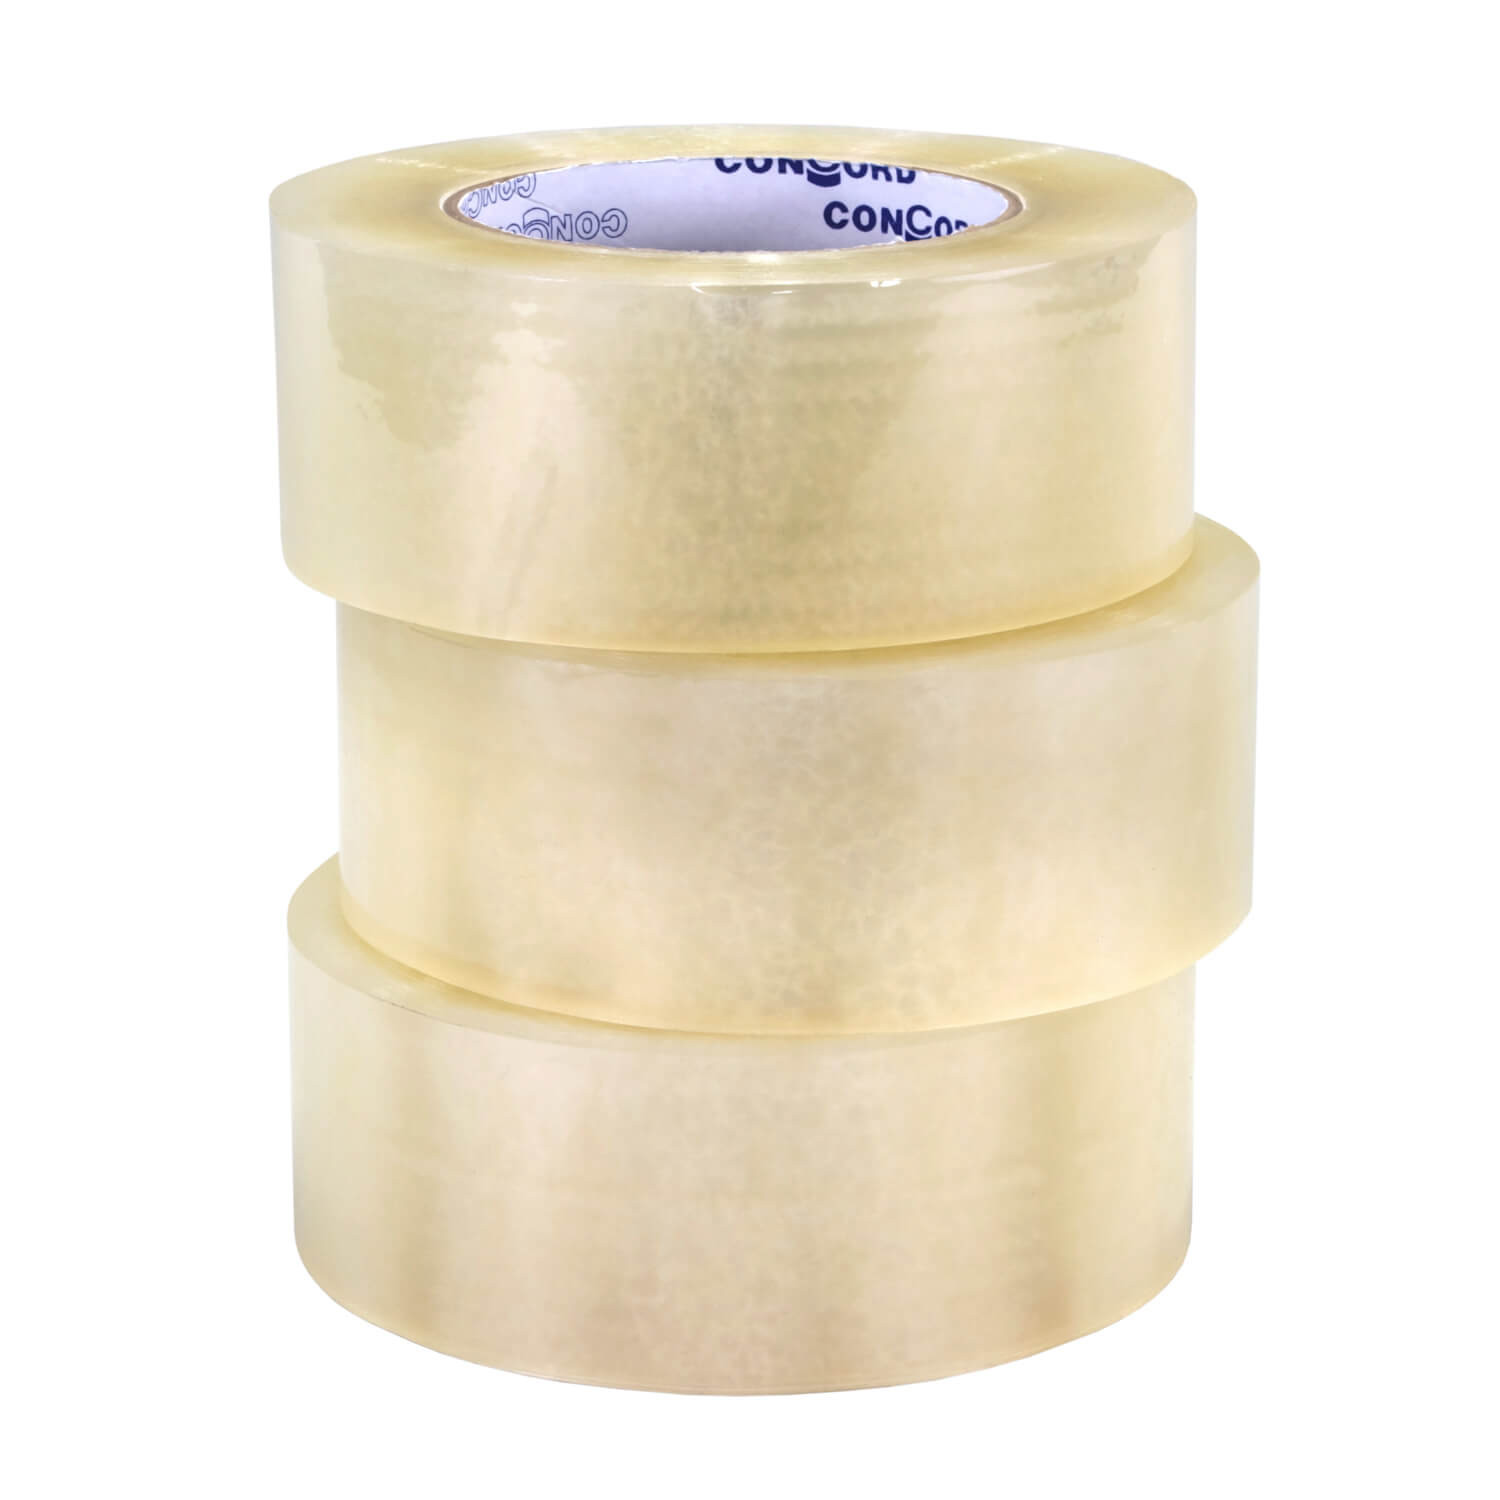 Shurtape HP-200 Production-Grade Packaging Tape: 2 in x 110 yds. (Clear)